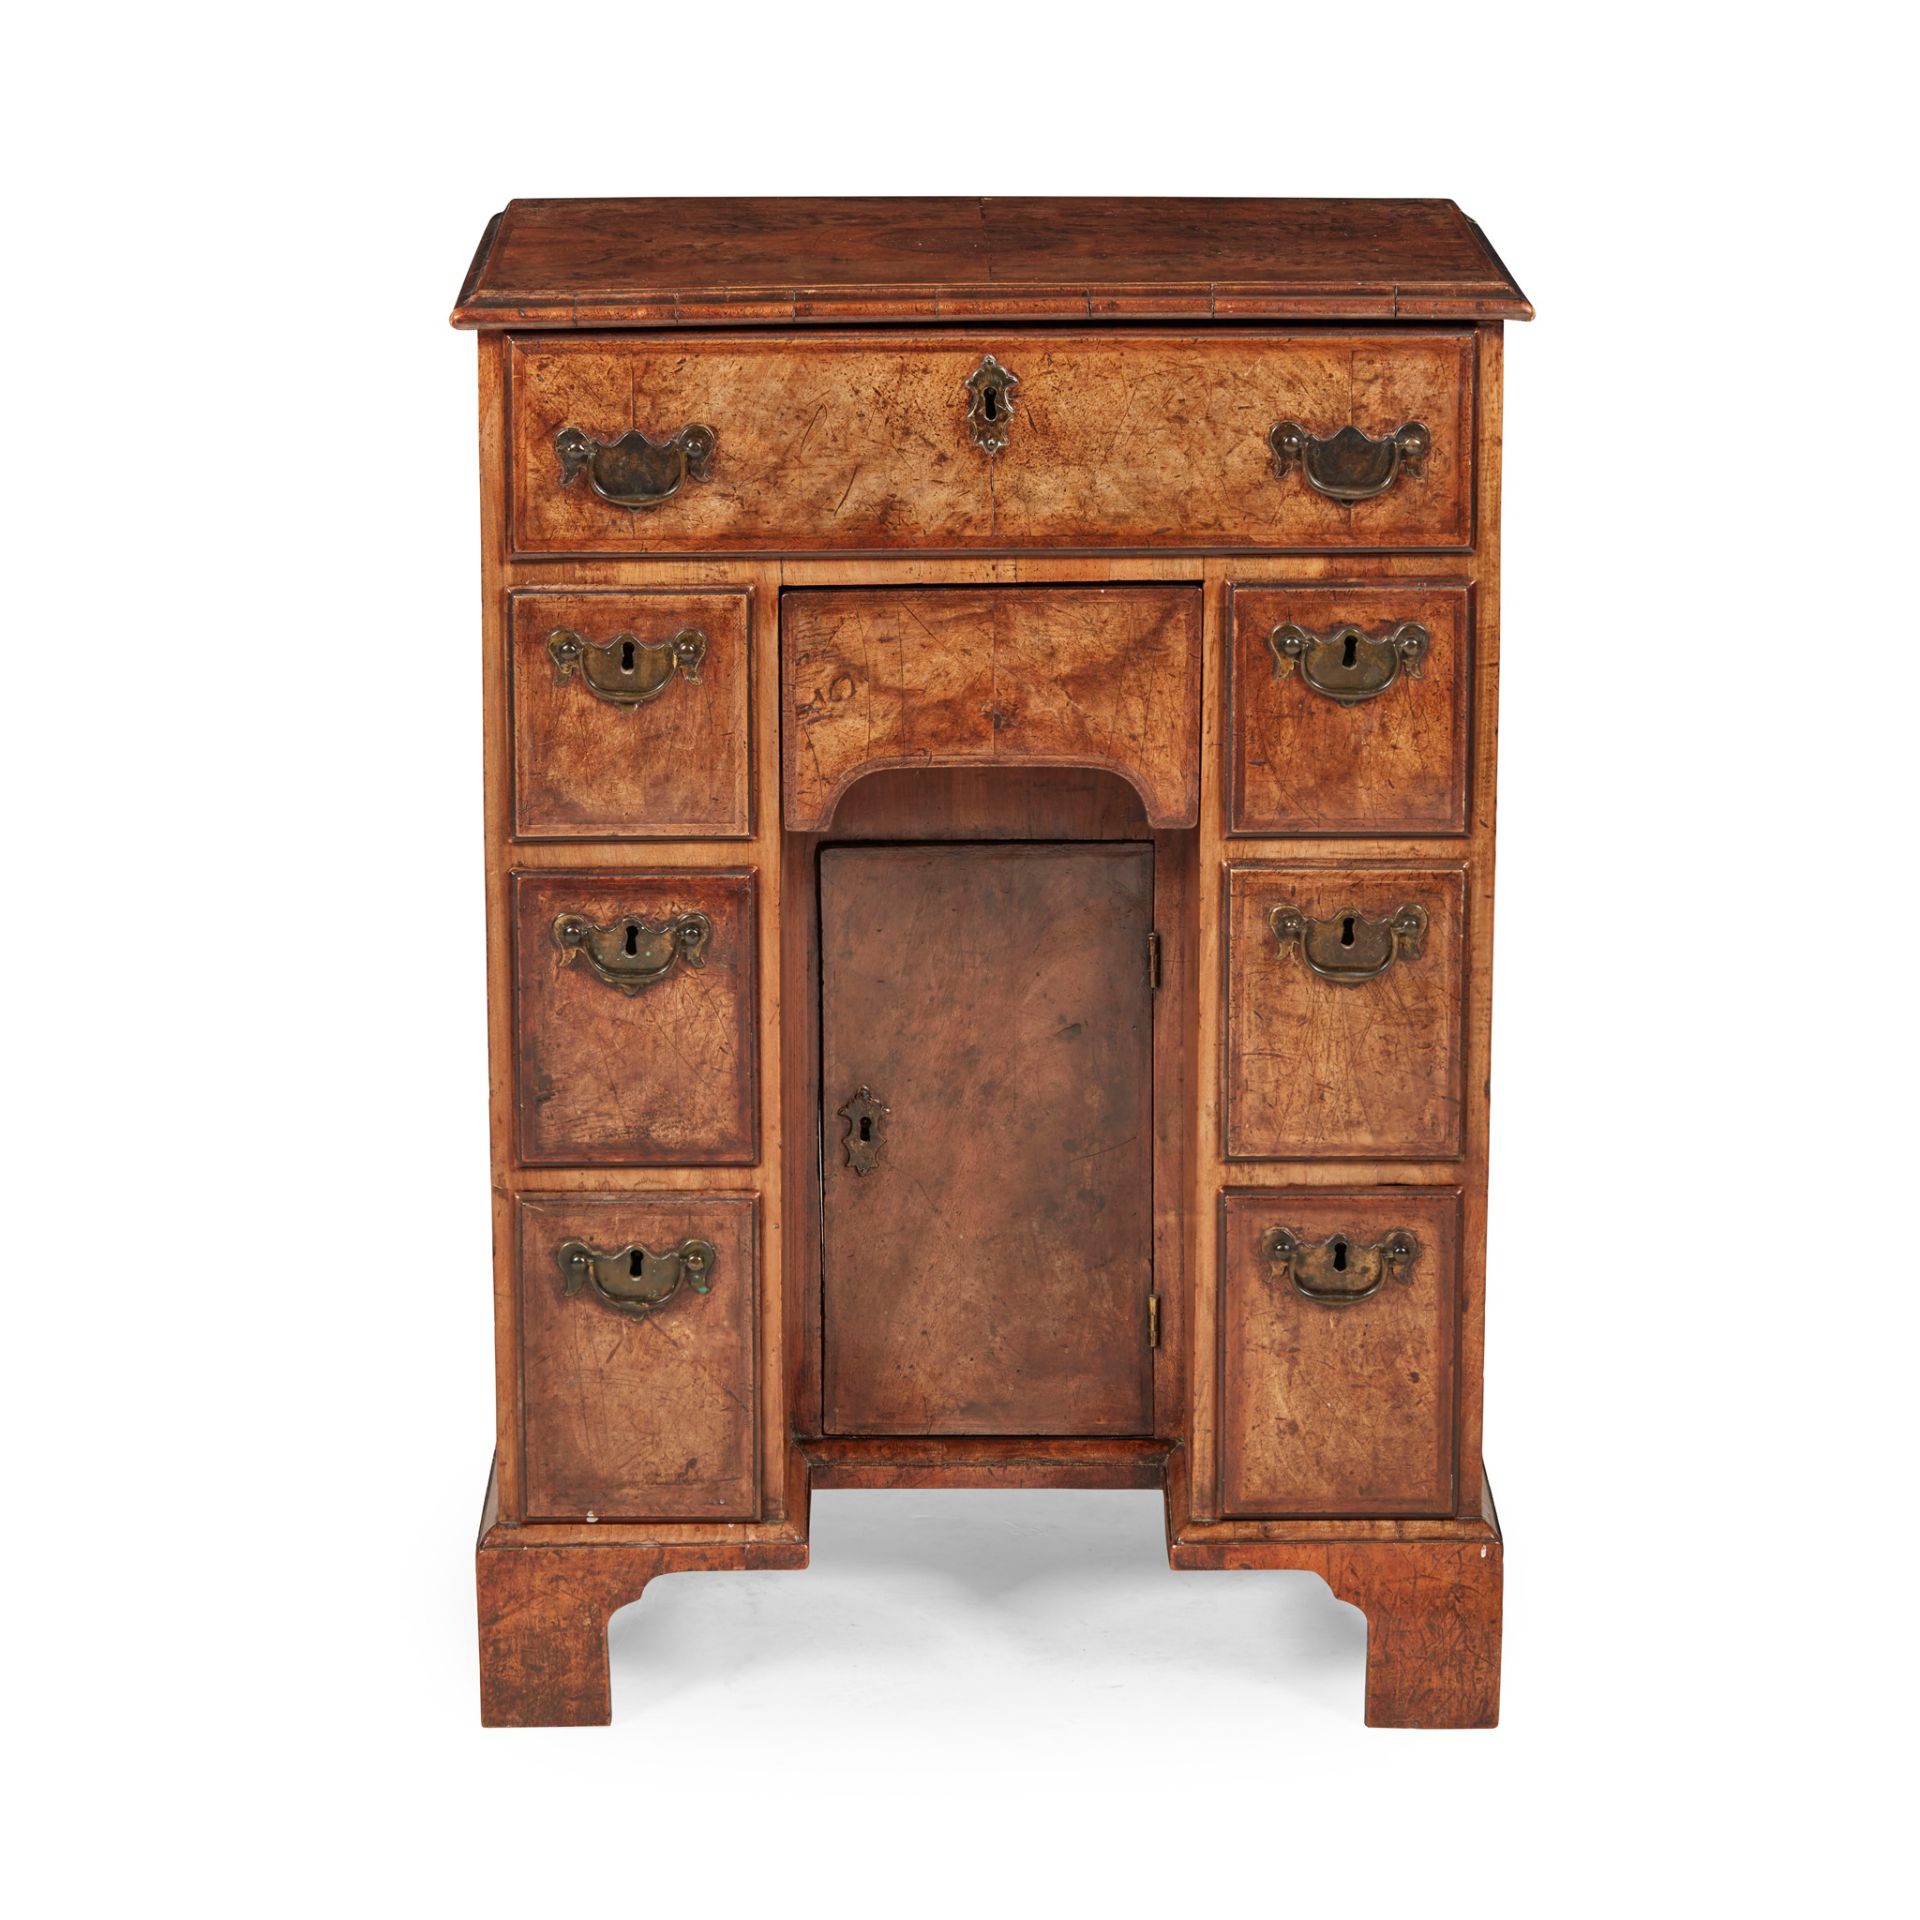 GEORGE I WALNUT KNEEHOLE DRESSING TABLE EARLY 18TH CENTURY - Image 2 of 3